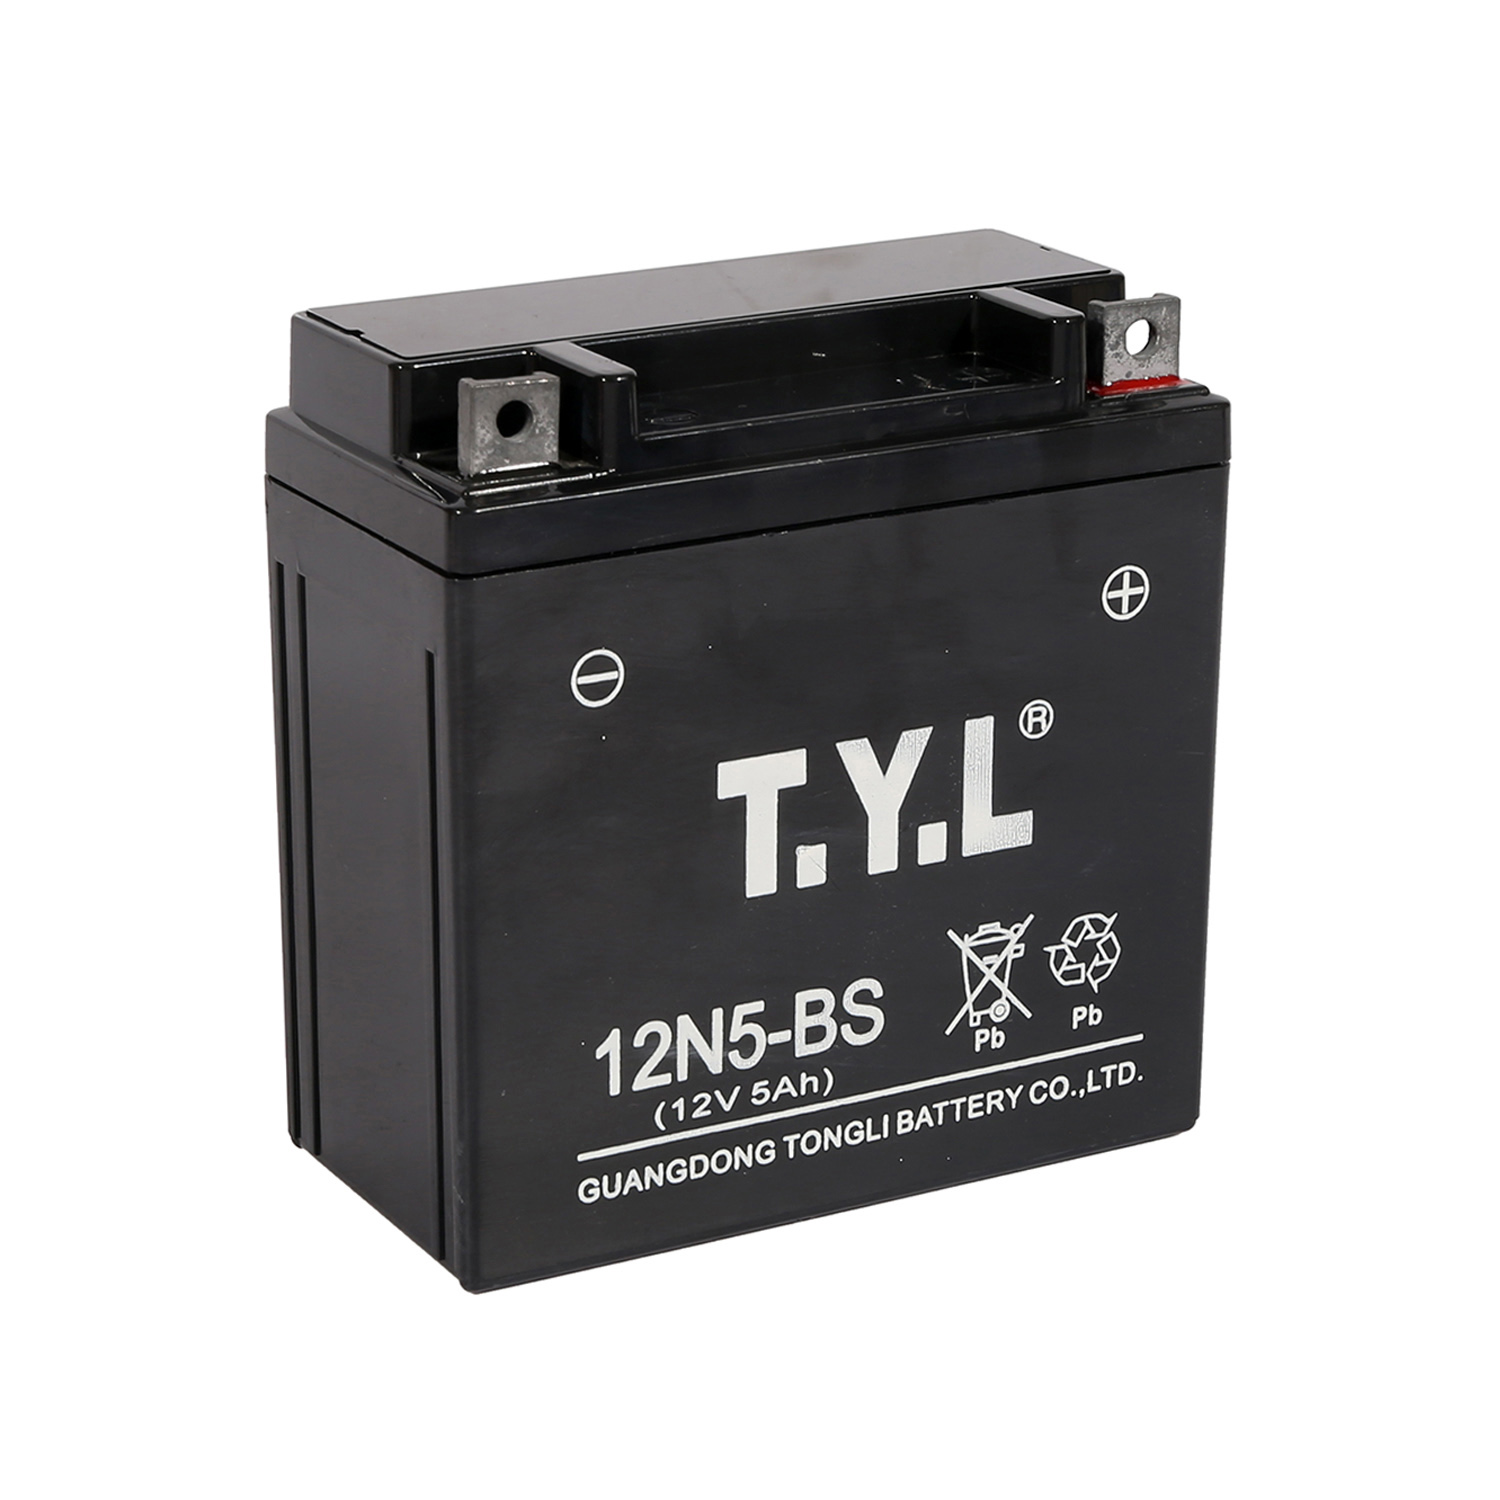 12N5-BS Wet Charge Maintenance Free Battery